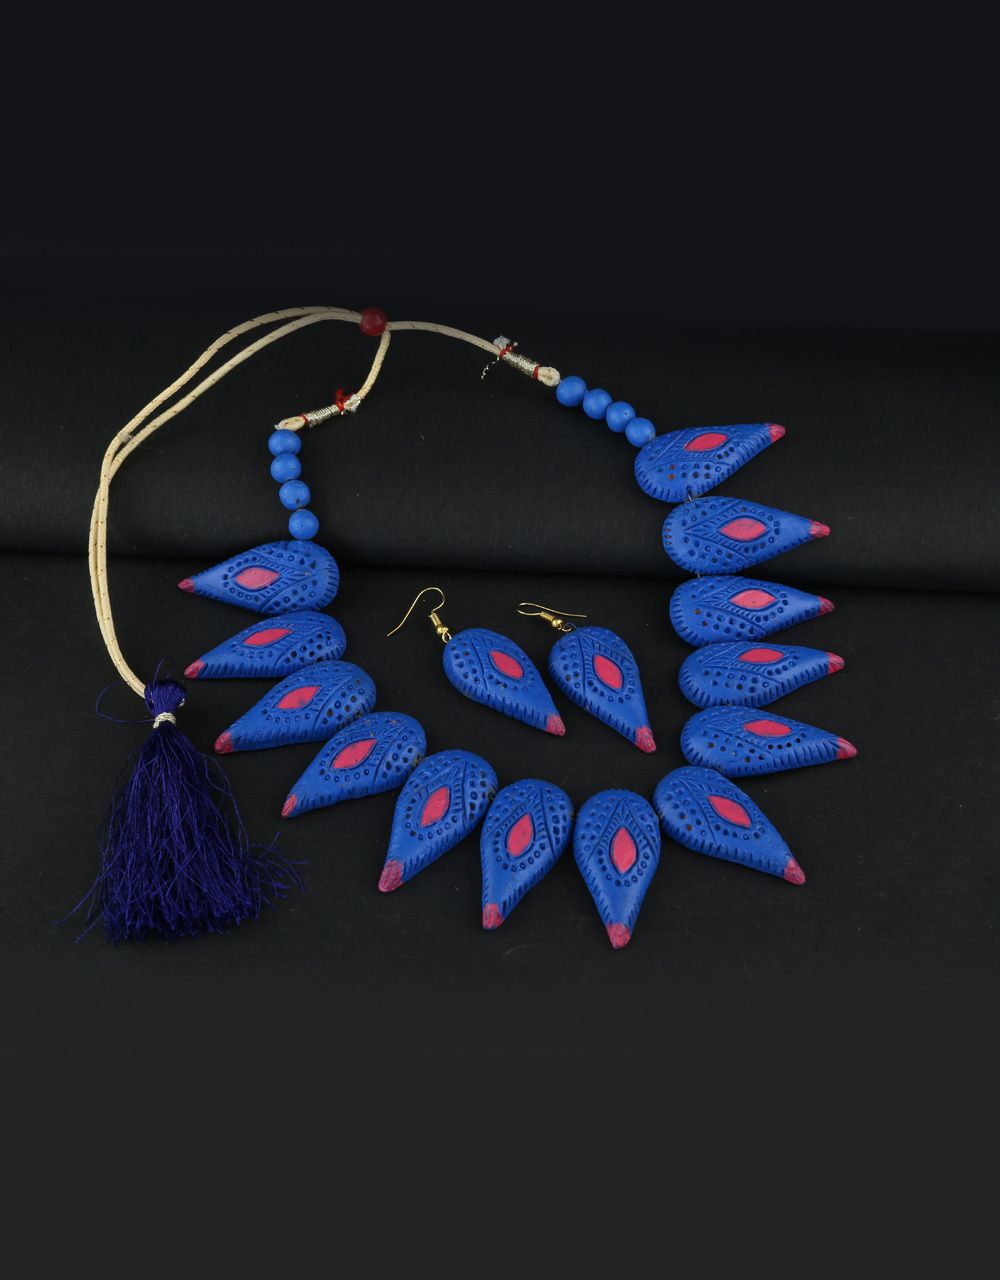 Buy Exclusive Collection of Terracotta Jewellery at Lowest Price 